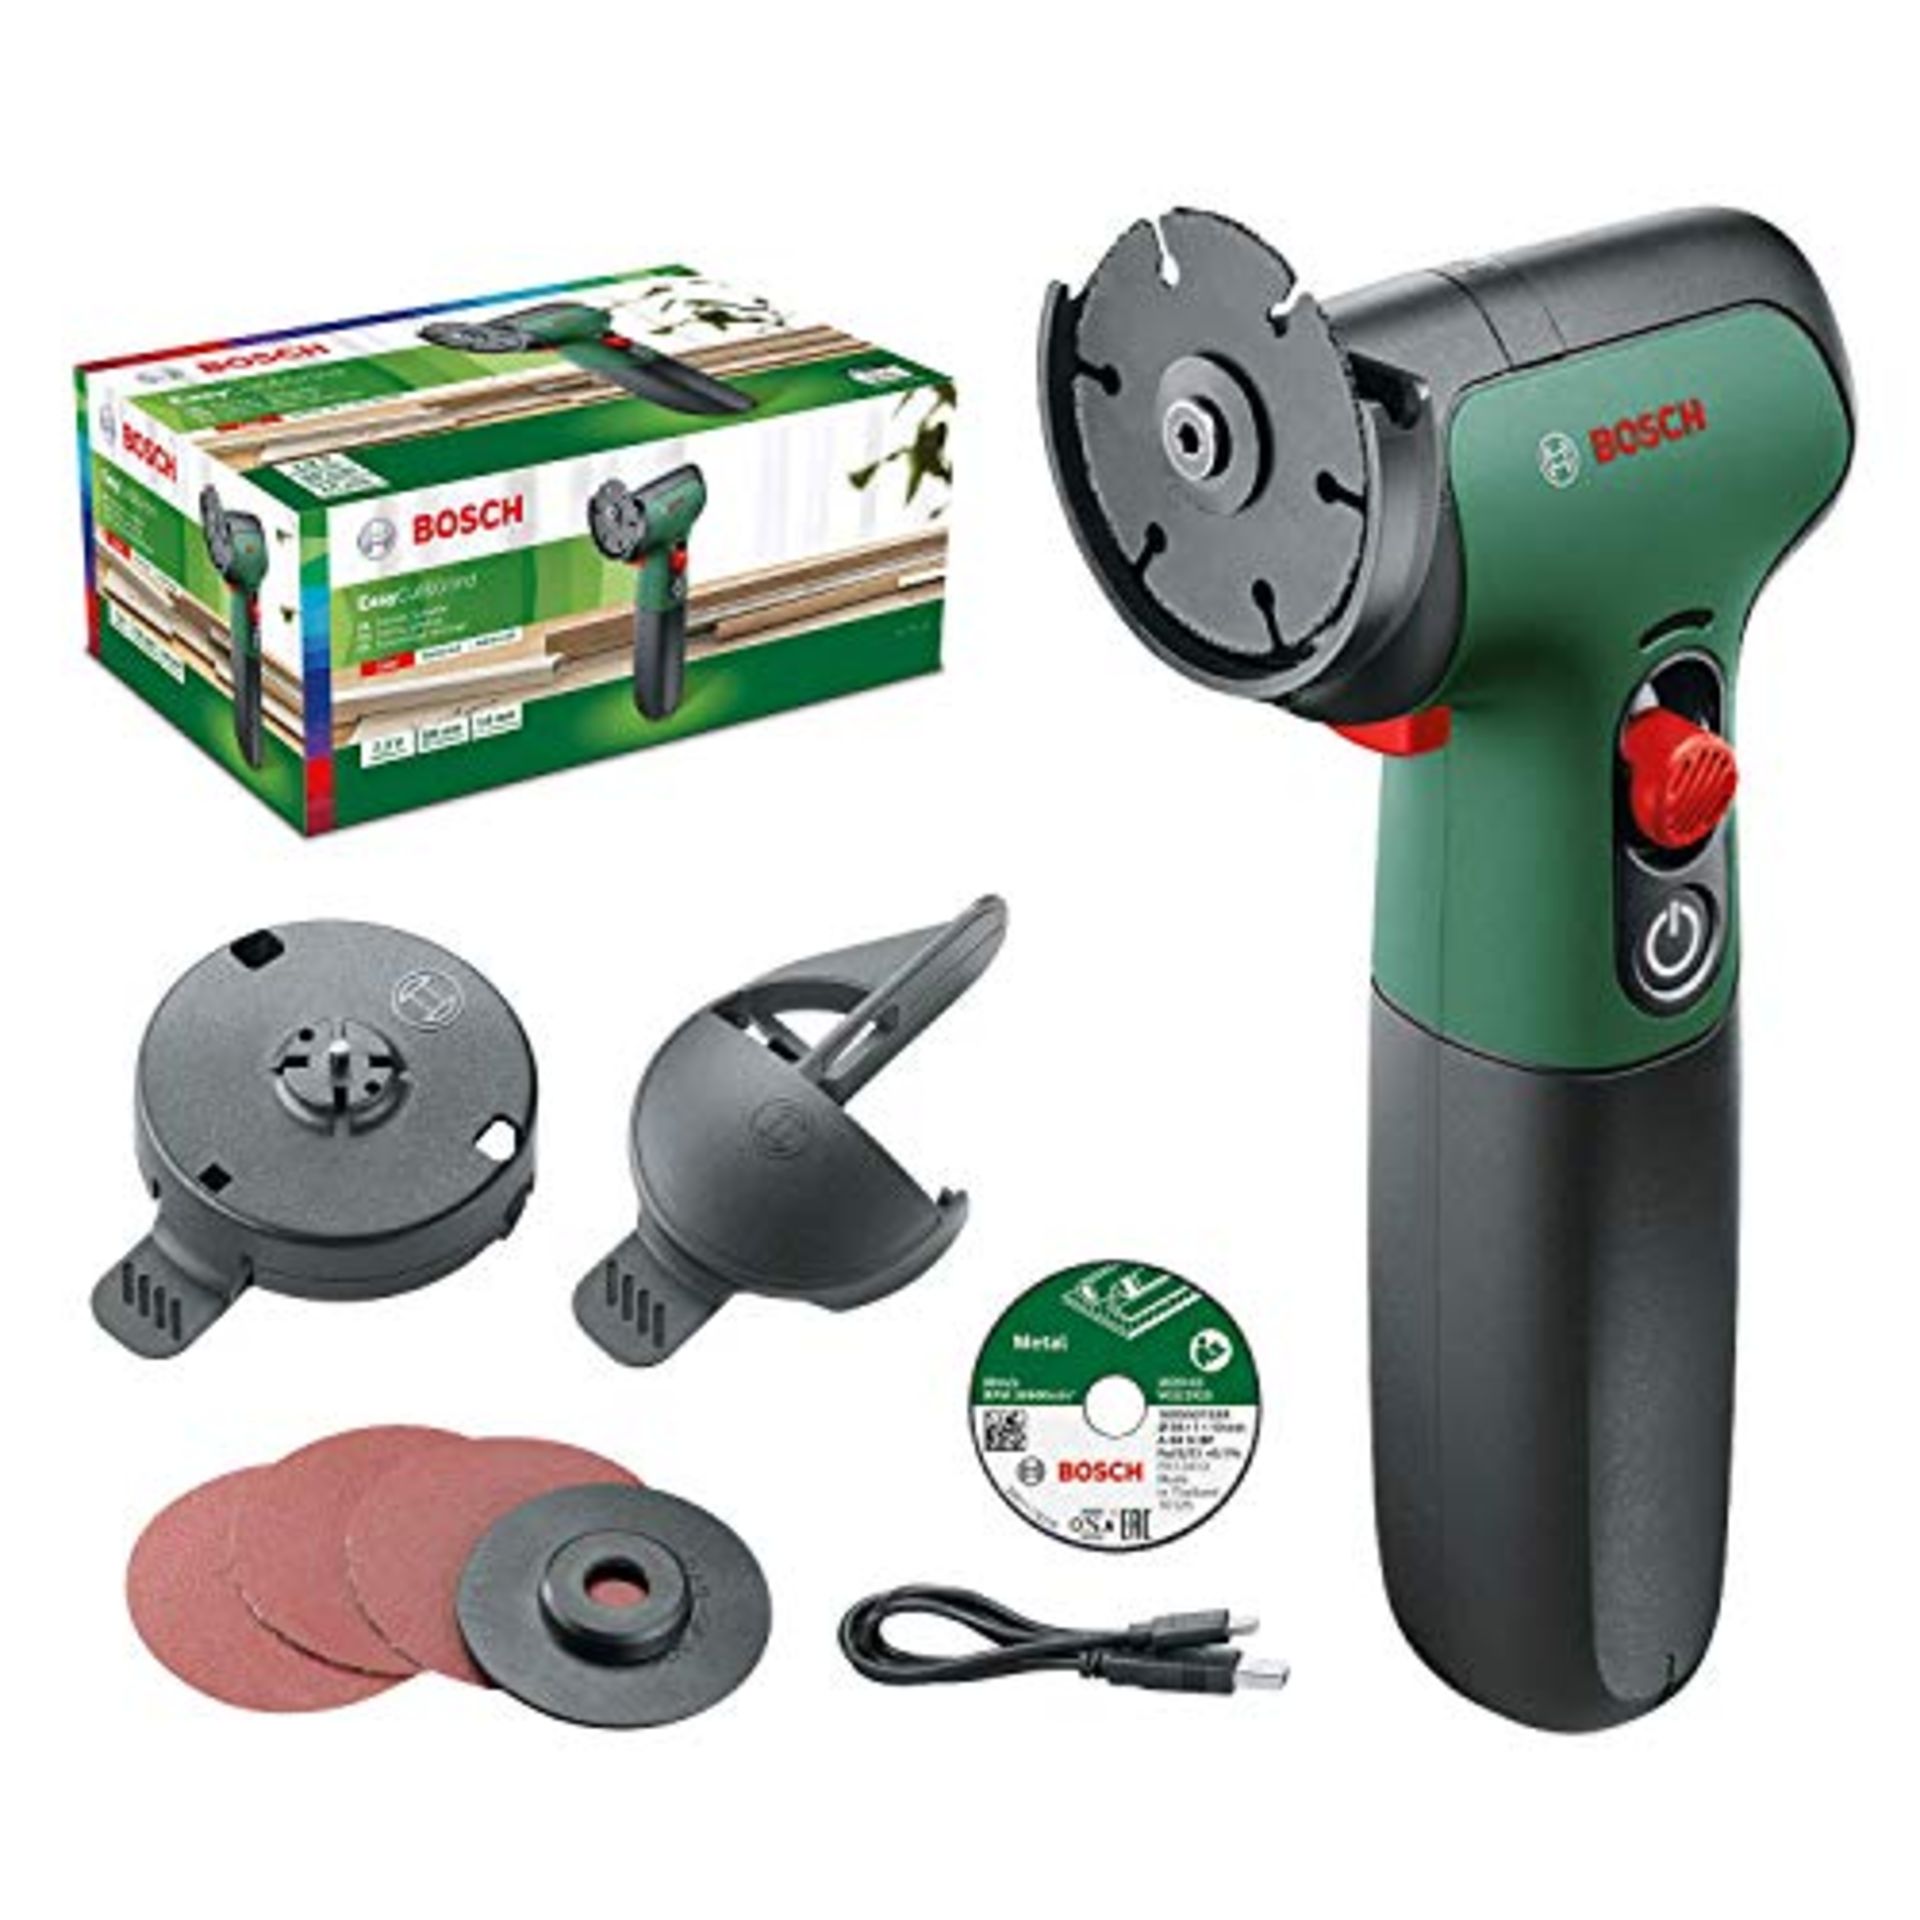 RRP £79.00 Bosch Home and Garden Bosch Mini-Angle Grinder EasyCut&Grind (cutting wood (round wood